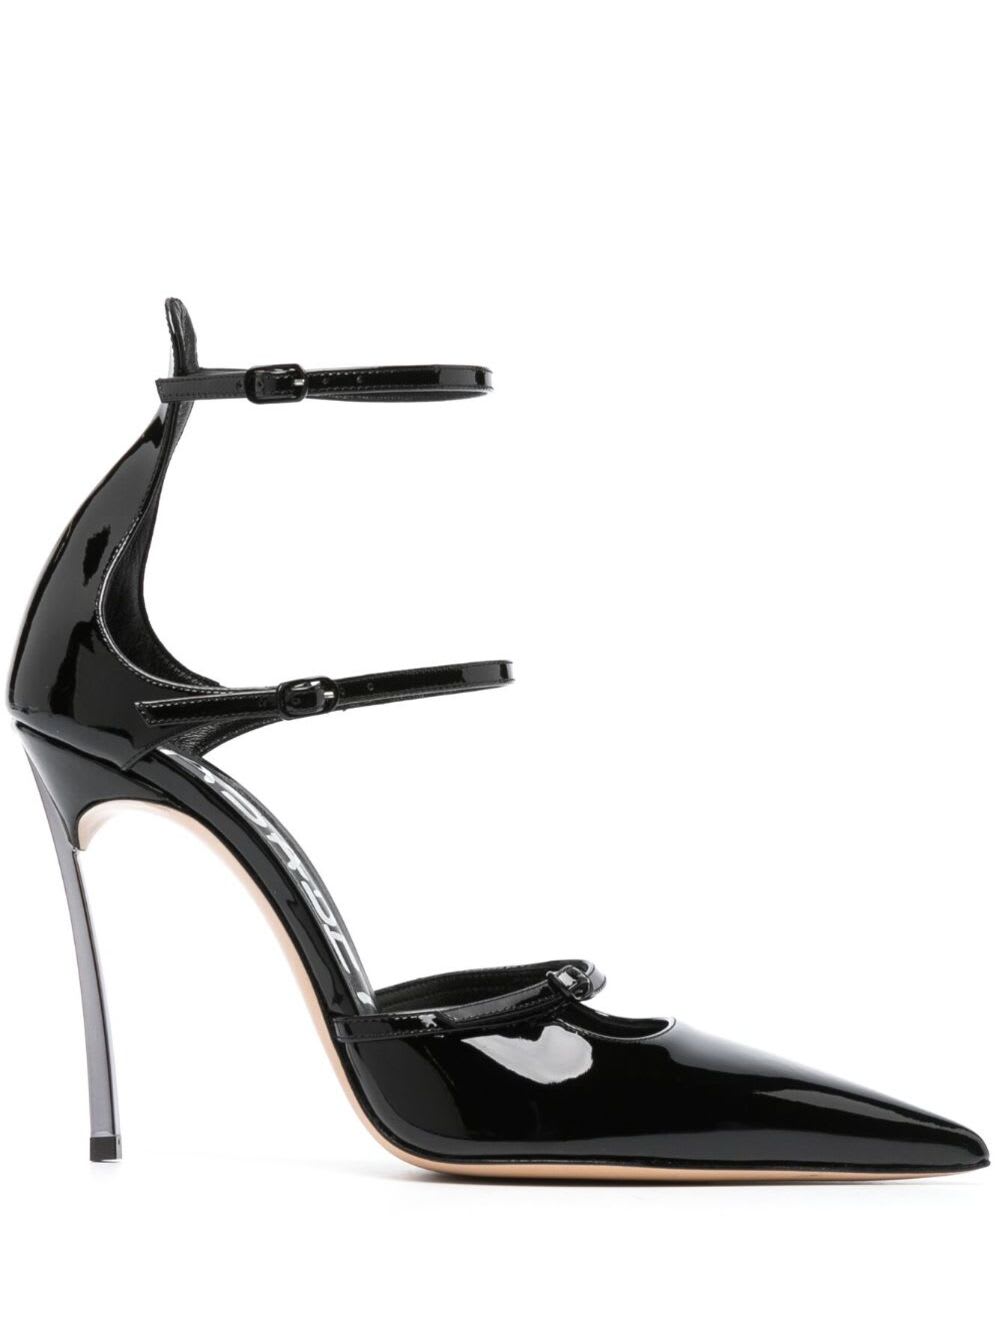 CASADEI RACHEL BLACK POINTED PUMPS WITH STRAPS IN PATENT LEATHER WOMAN